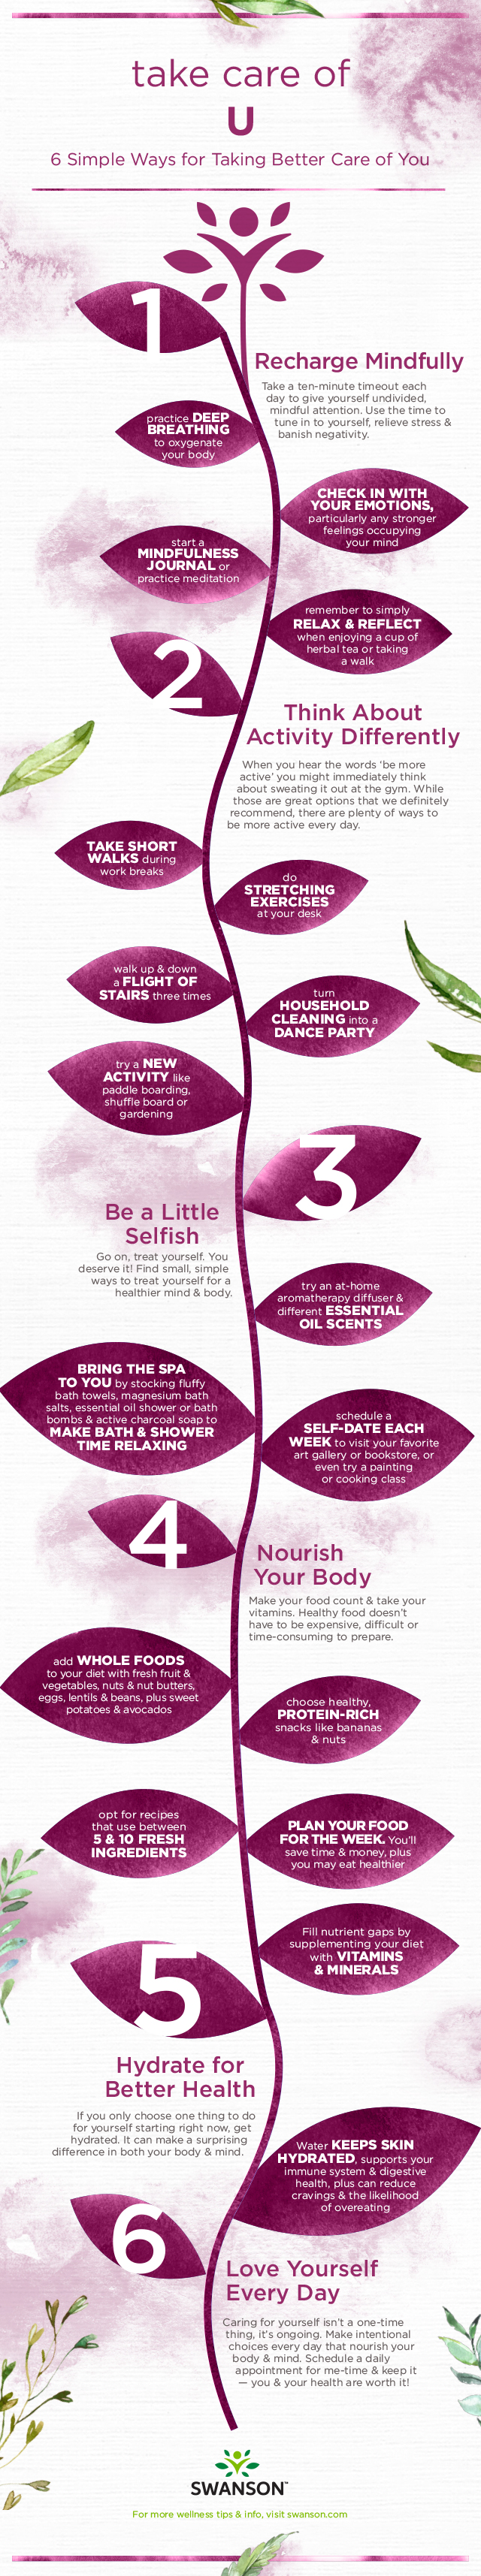 Ways to Take Care of You - infographic with self-care tips